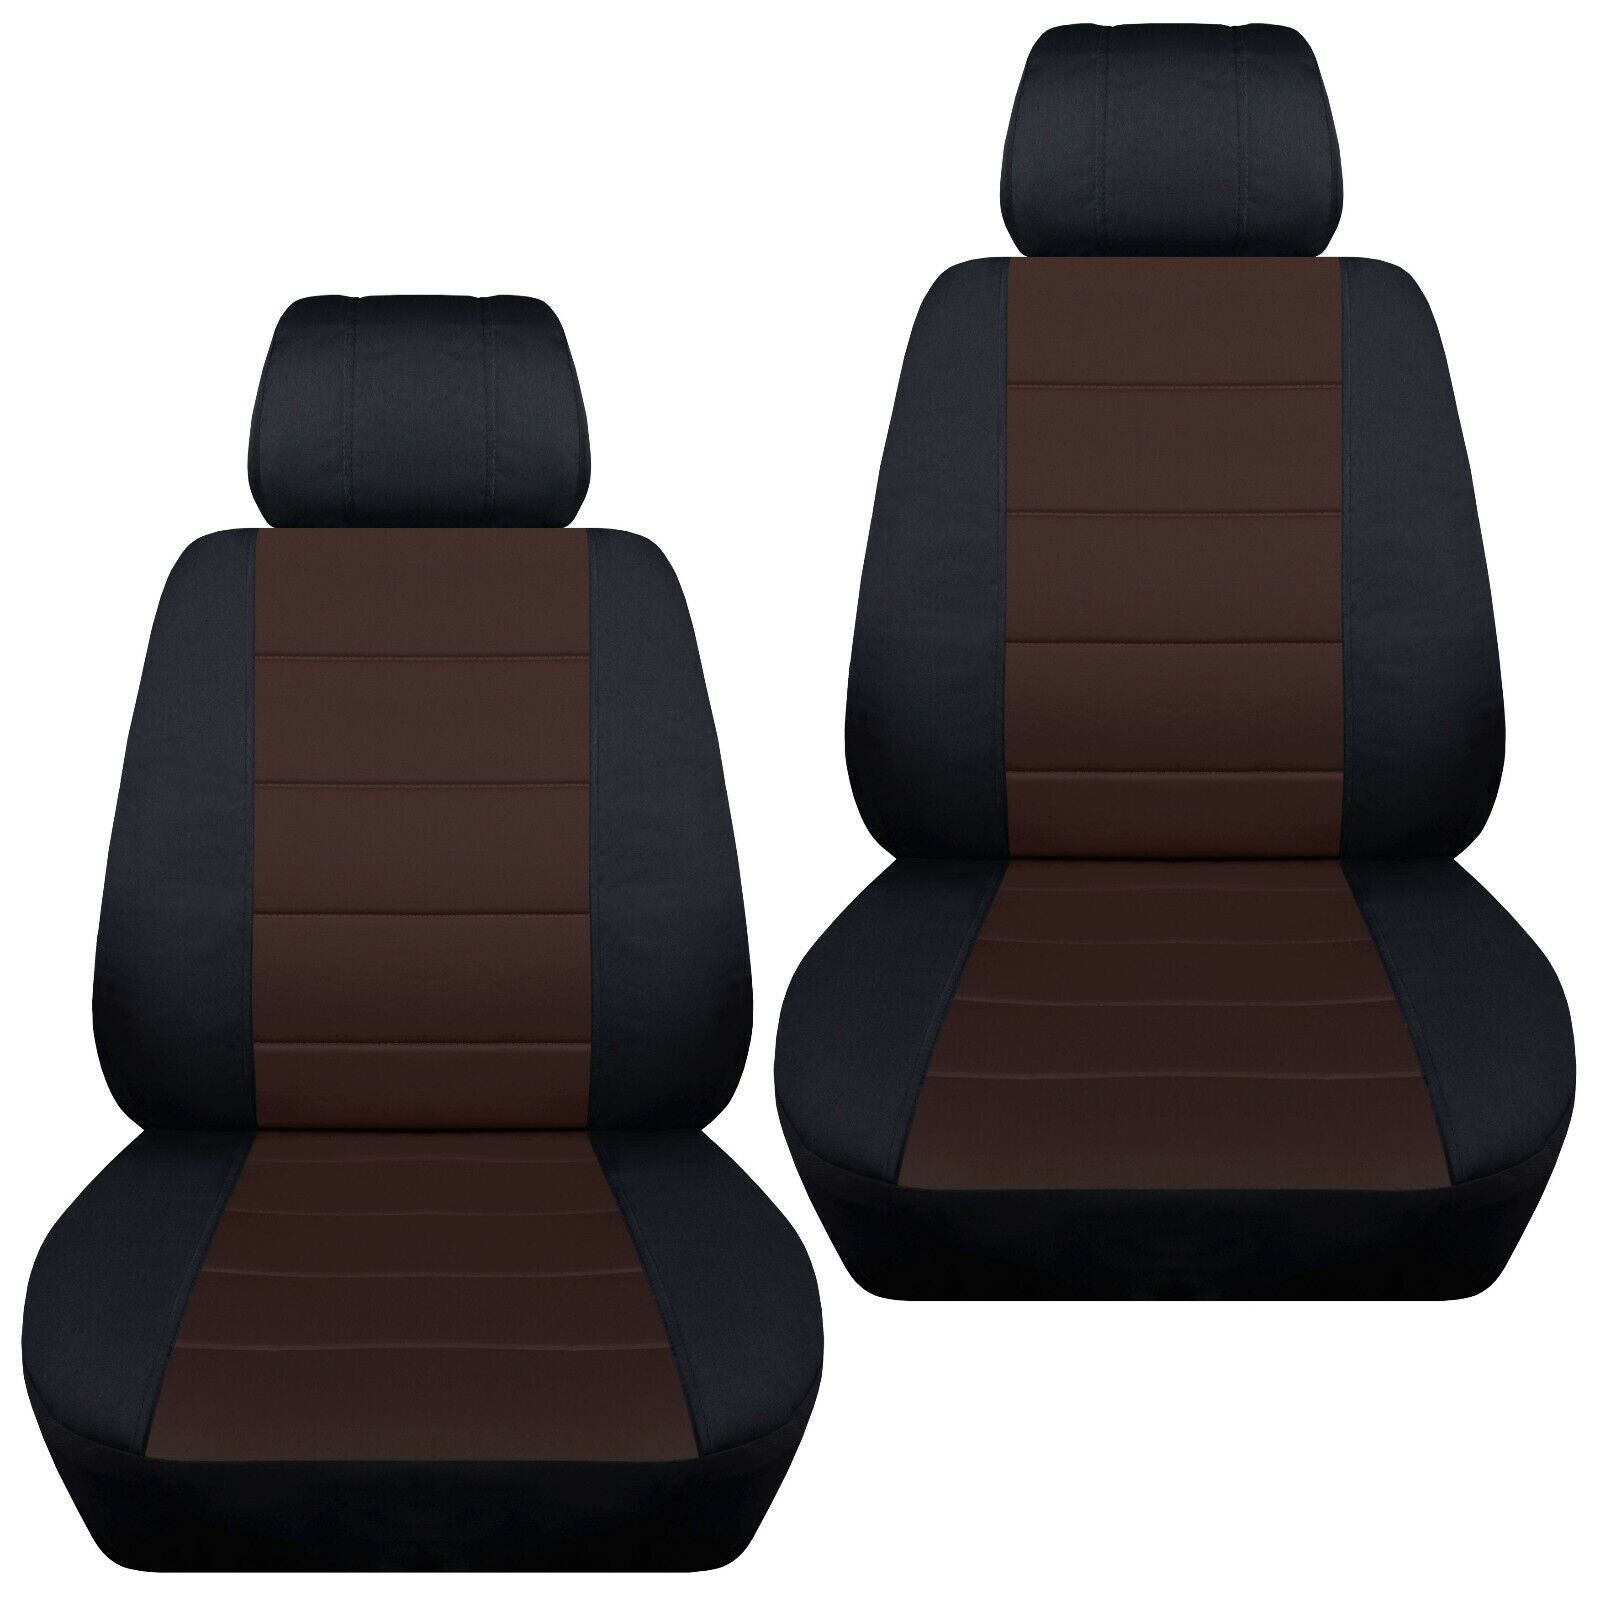 Primary image for Front set car seat covers fits 1996-2020 Honda Civic   black and brown